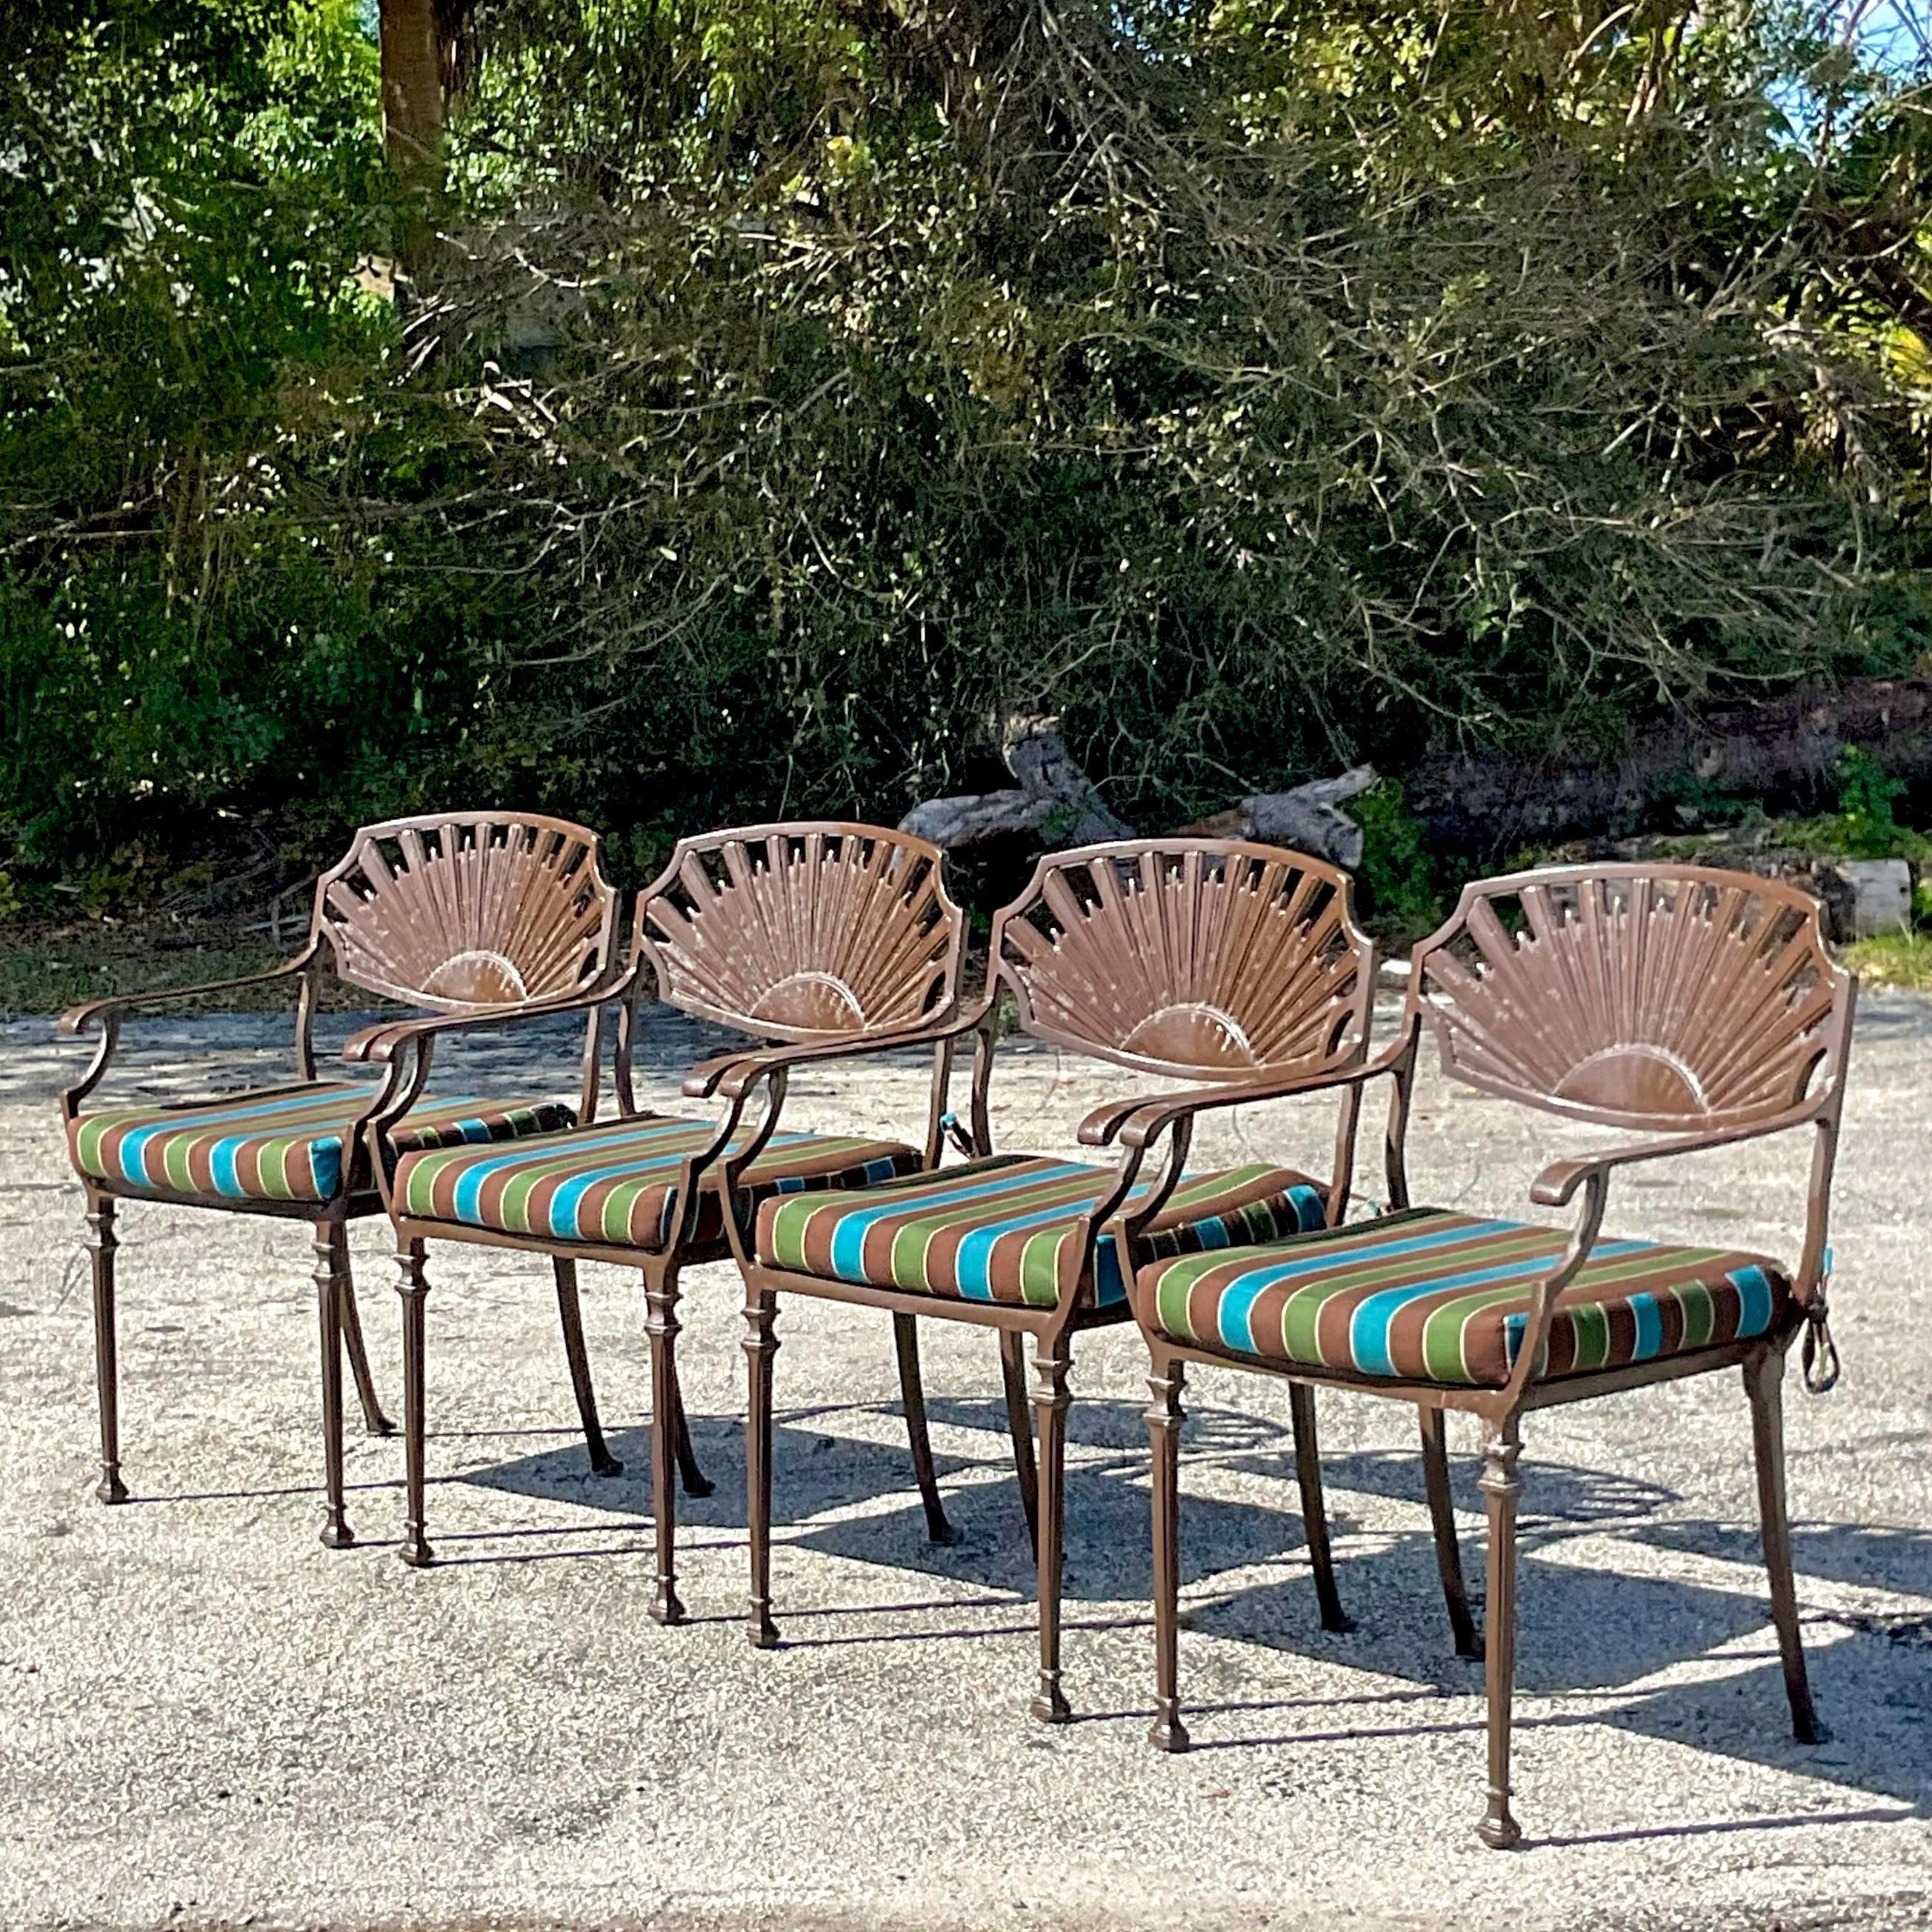 A fabulous vintage Coastal dining set for four. A chic fan back design on a wrought iron frame. Coordinating ring on the table pedestal. Acquired from a Palm Beach estate.

Table 60x60x30.5
Seat height 19.5